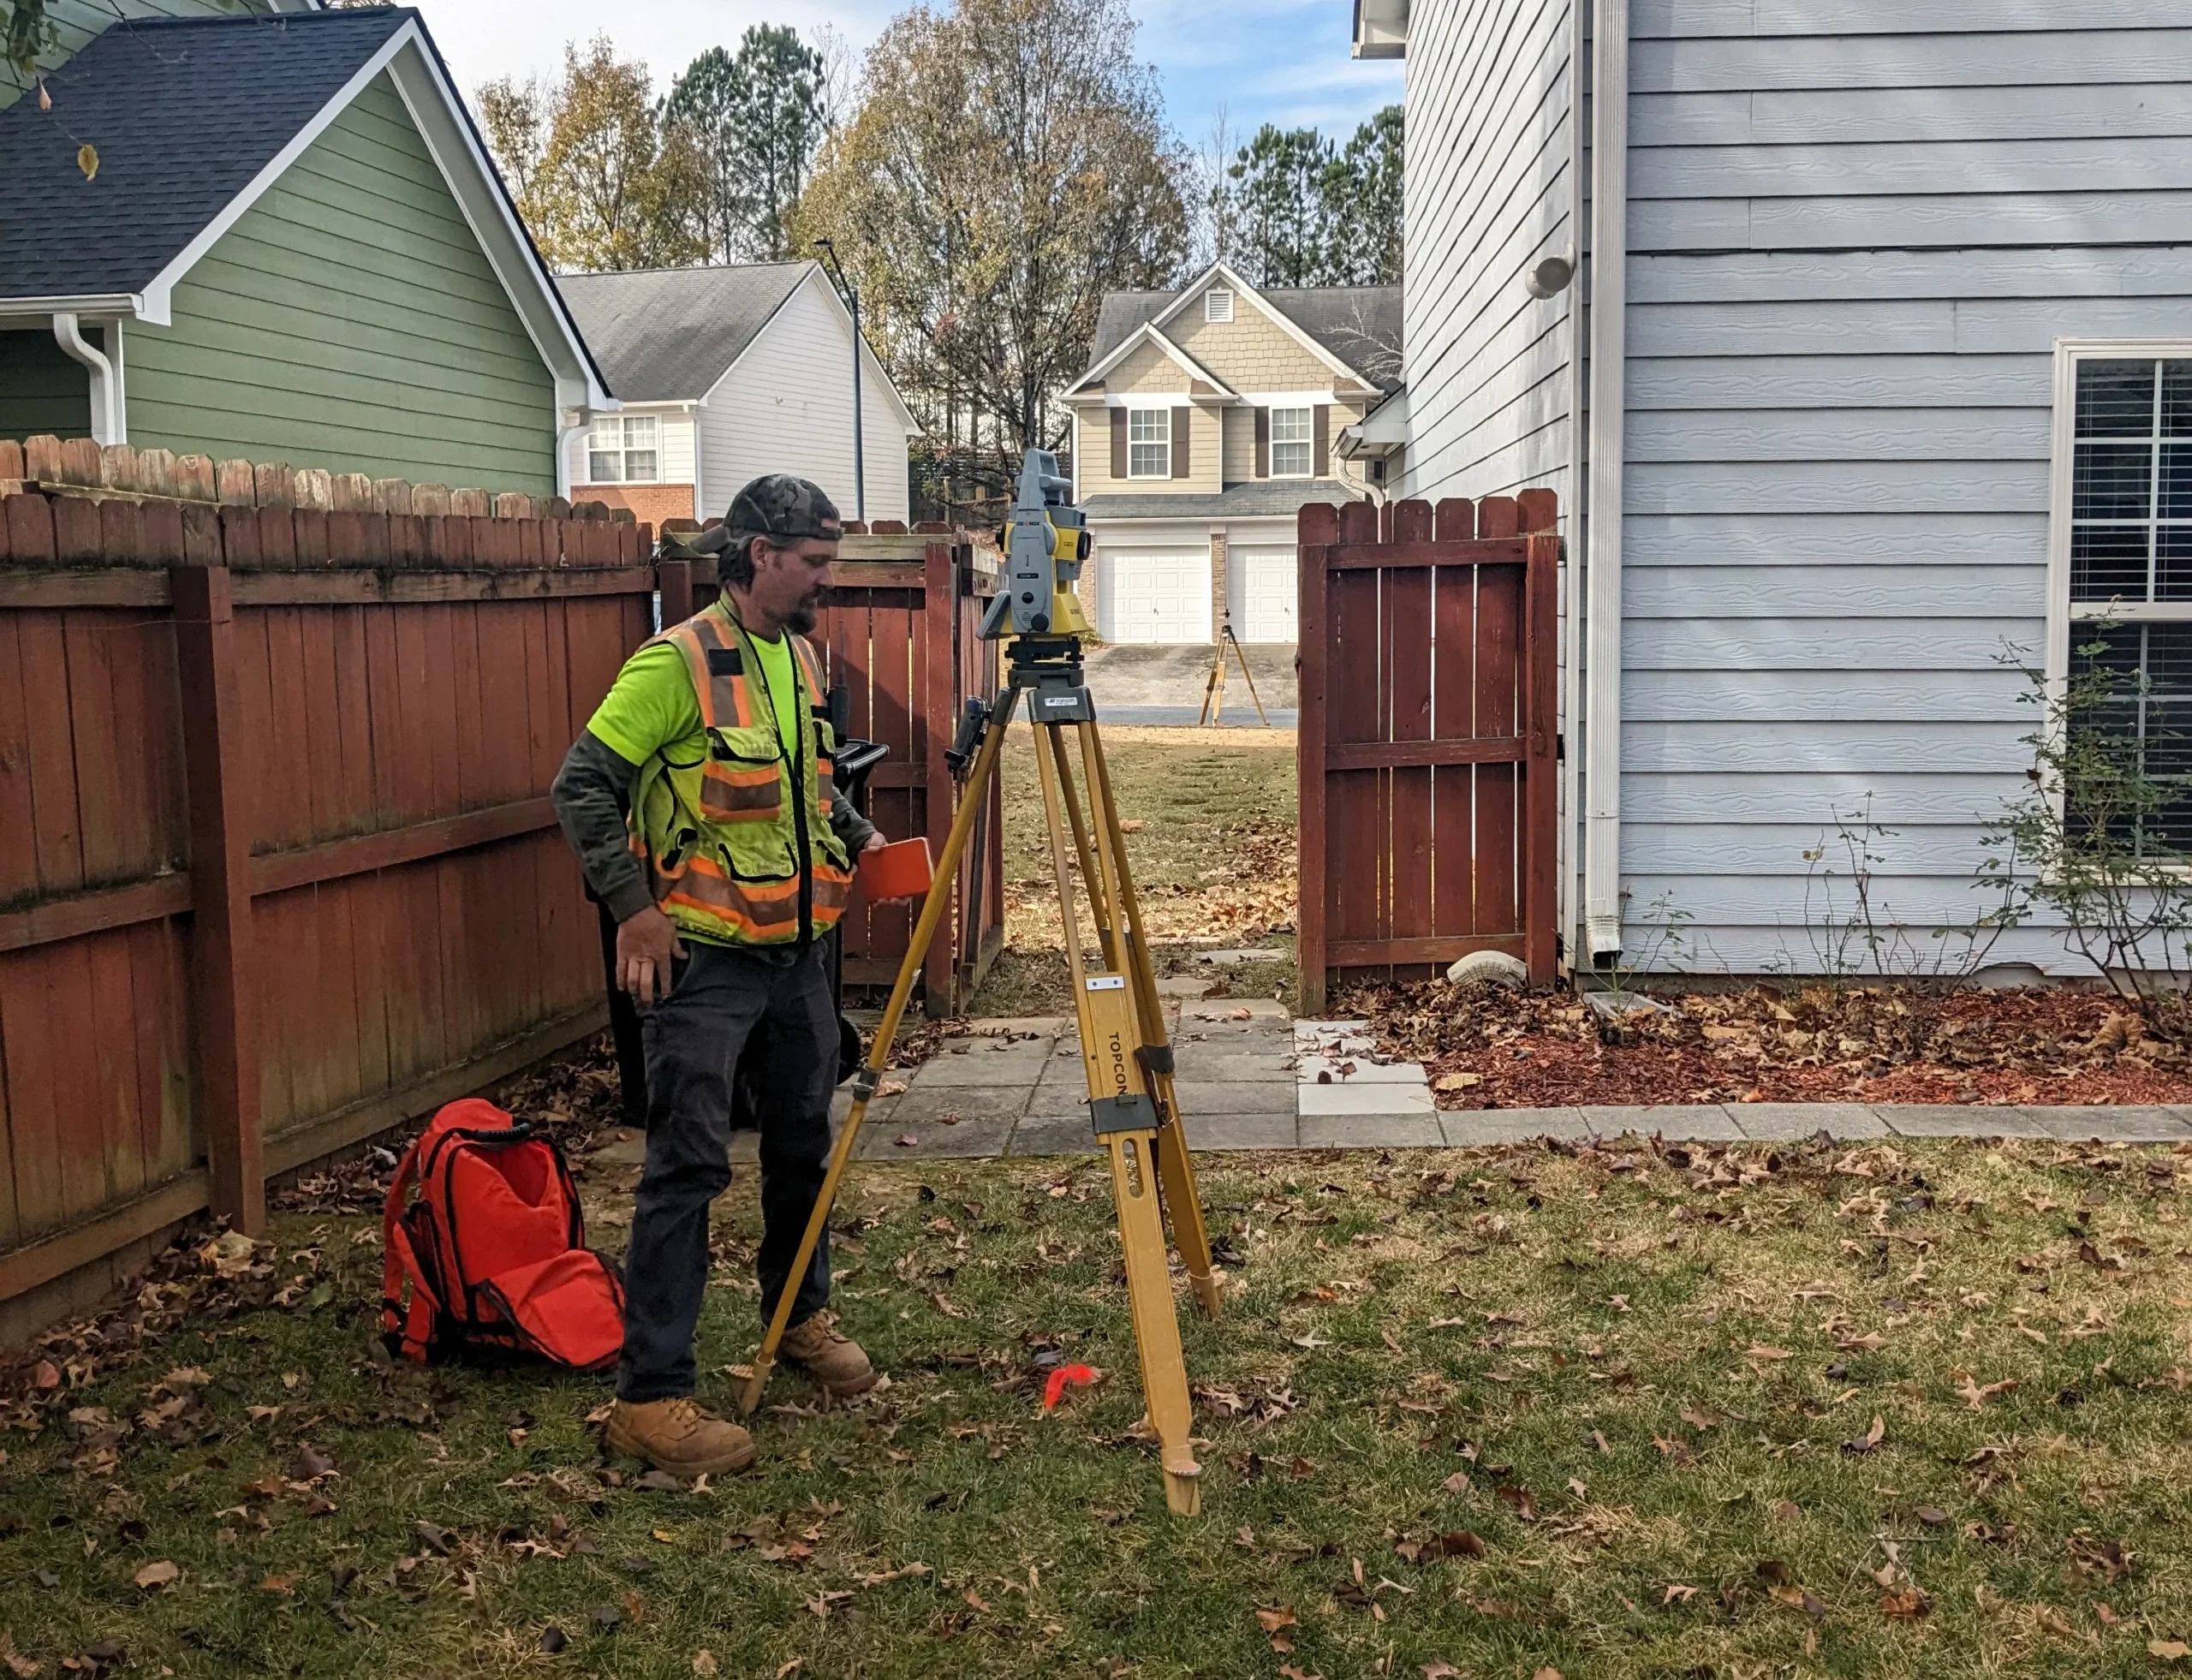 Surveyor reading a survey mapping camera, standing in the back yard of a fenced-in residential home.